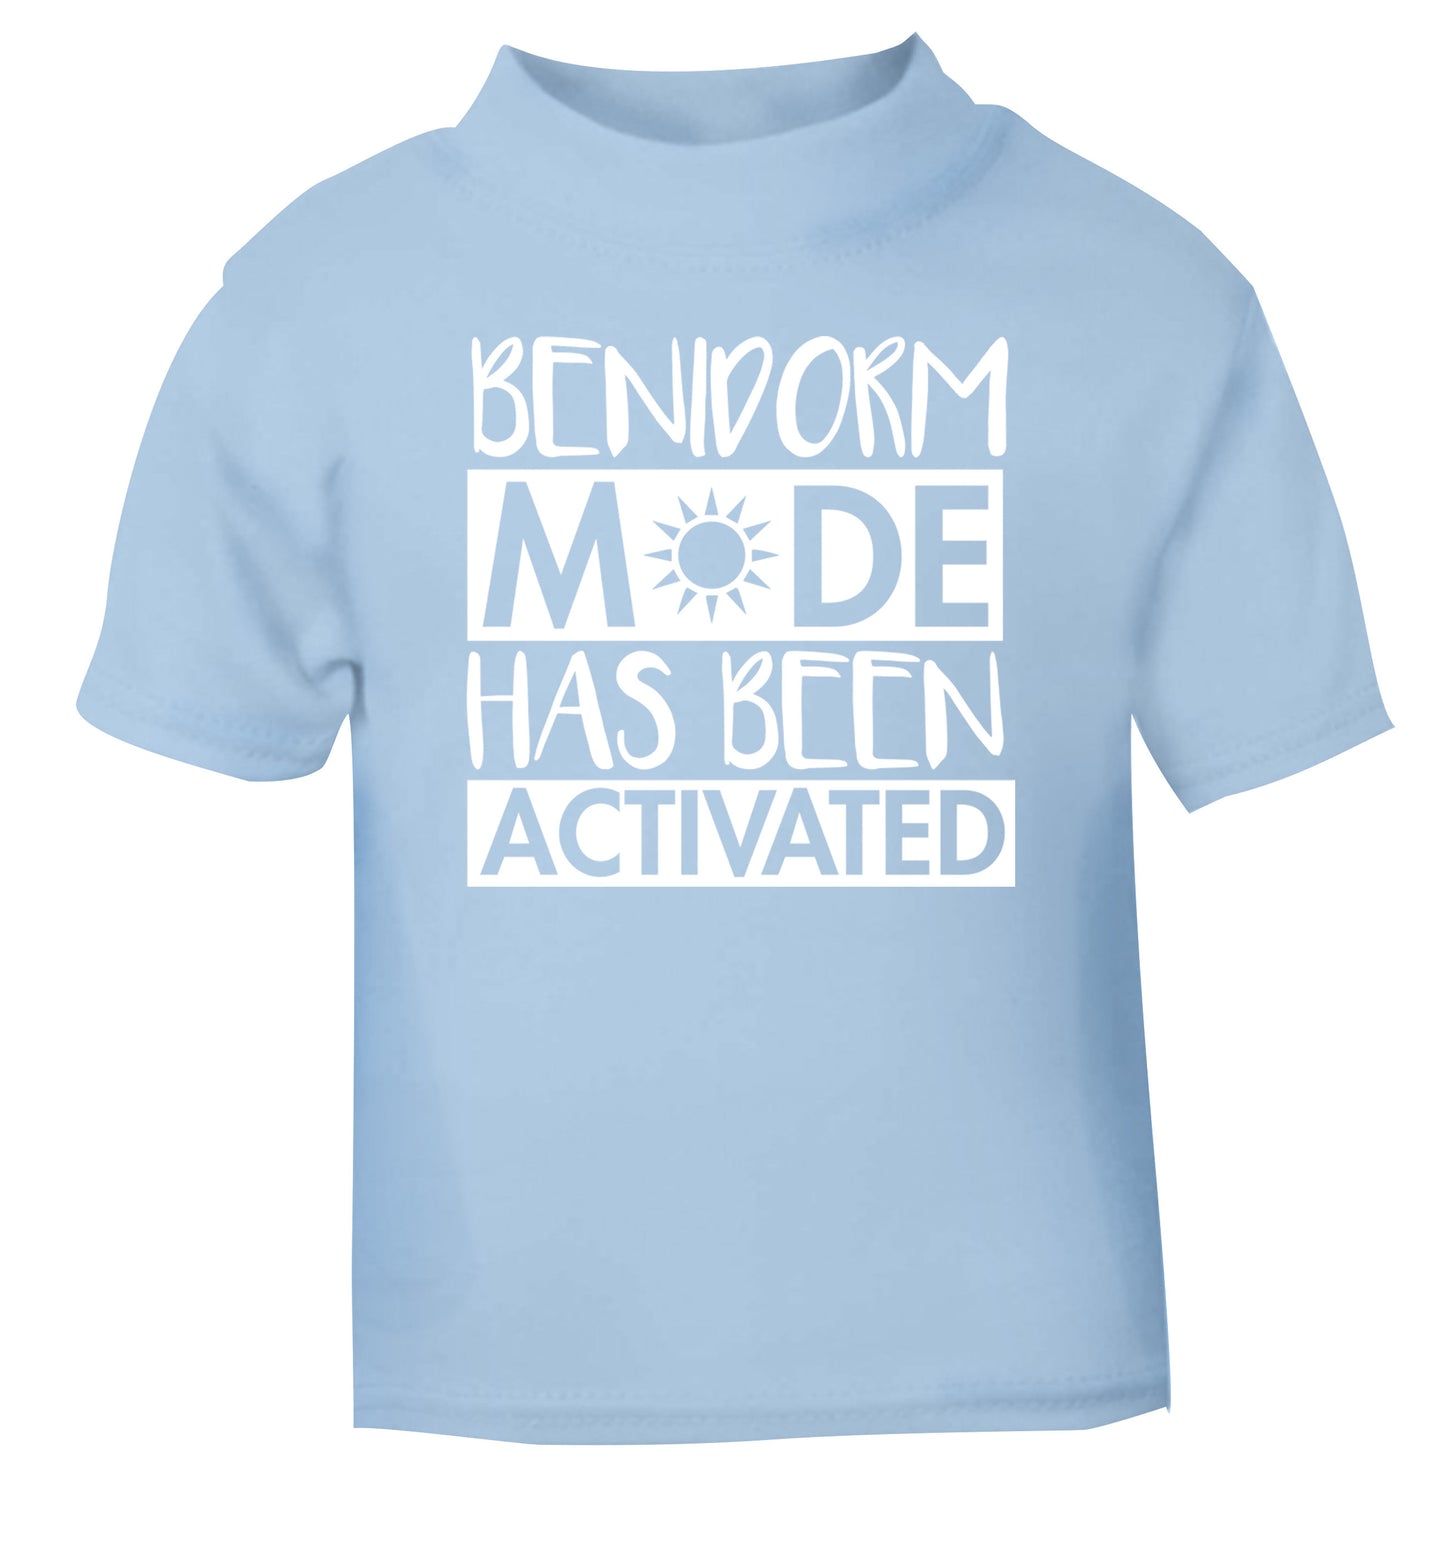 Benidorm mode has been activated light blue Baby Toddler Tshirt 2 Years